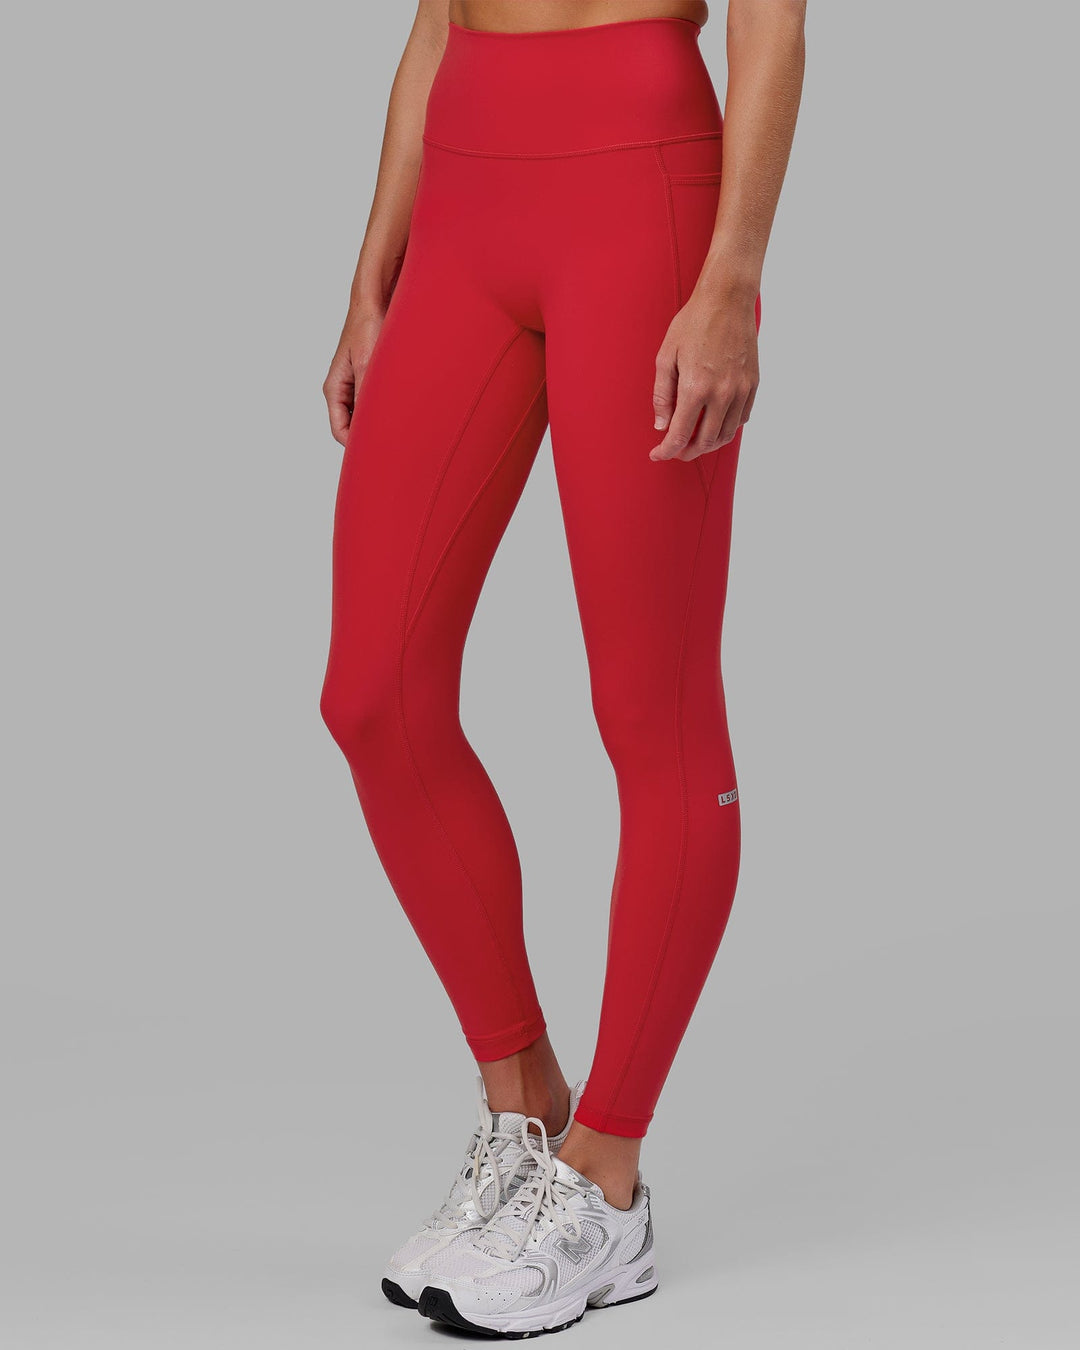 Woman wearing Fusion Full Length Tight - Scarlet